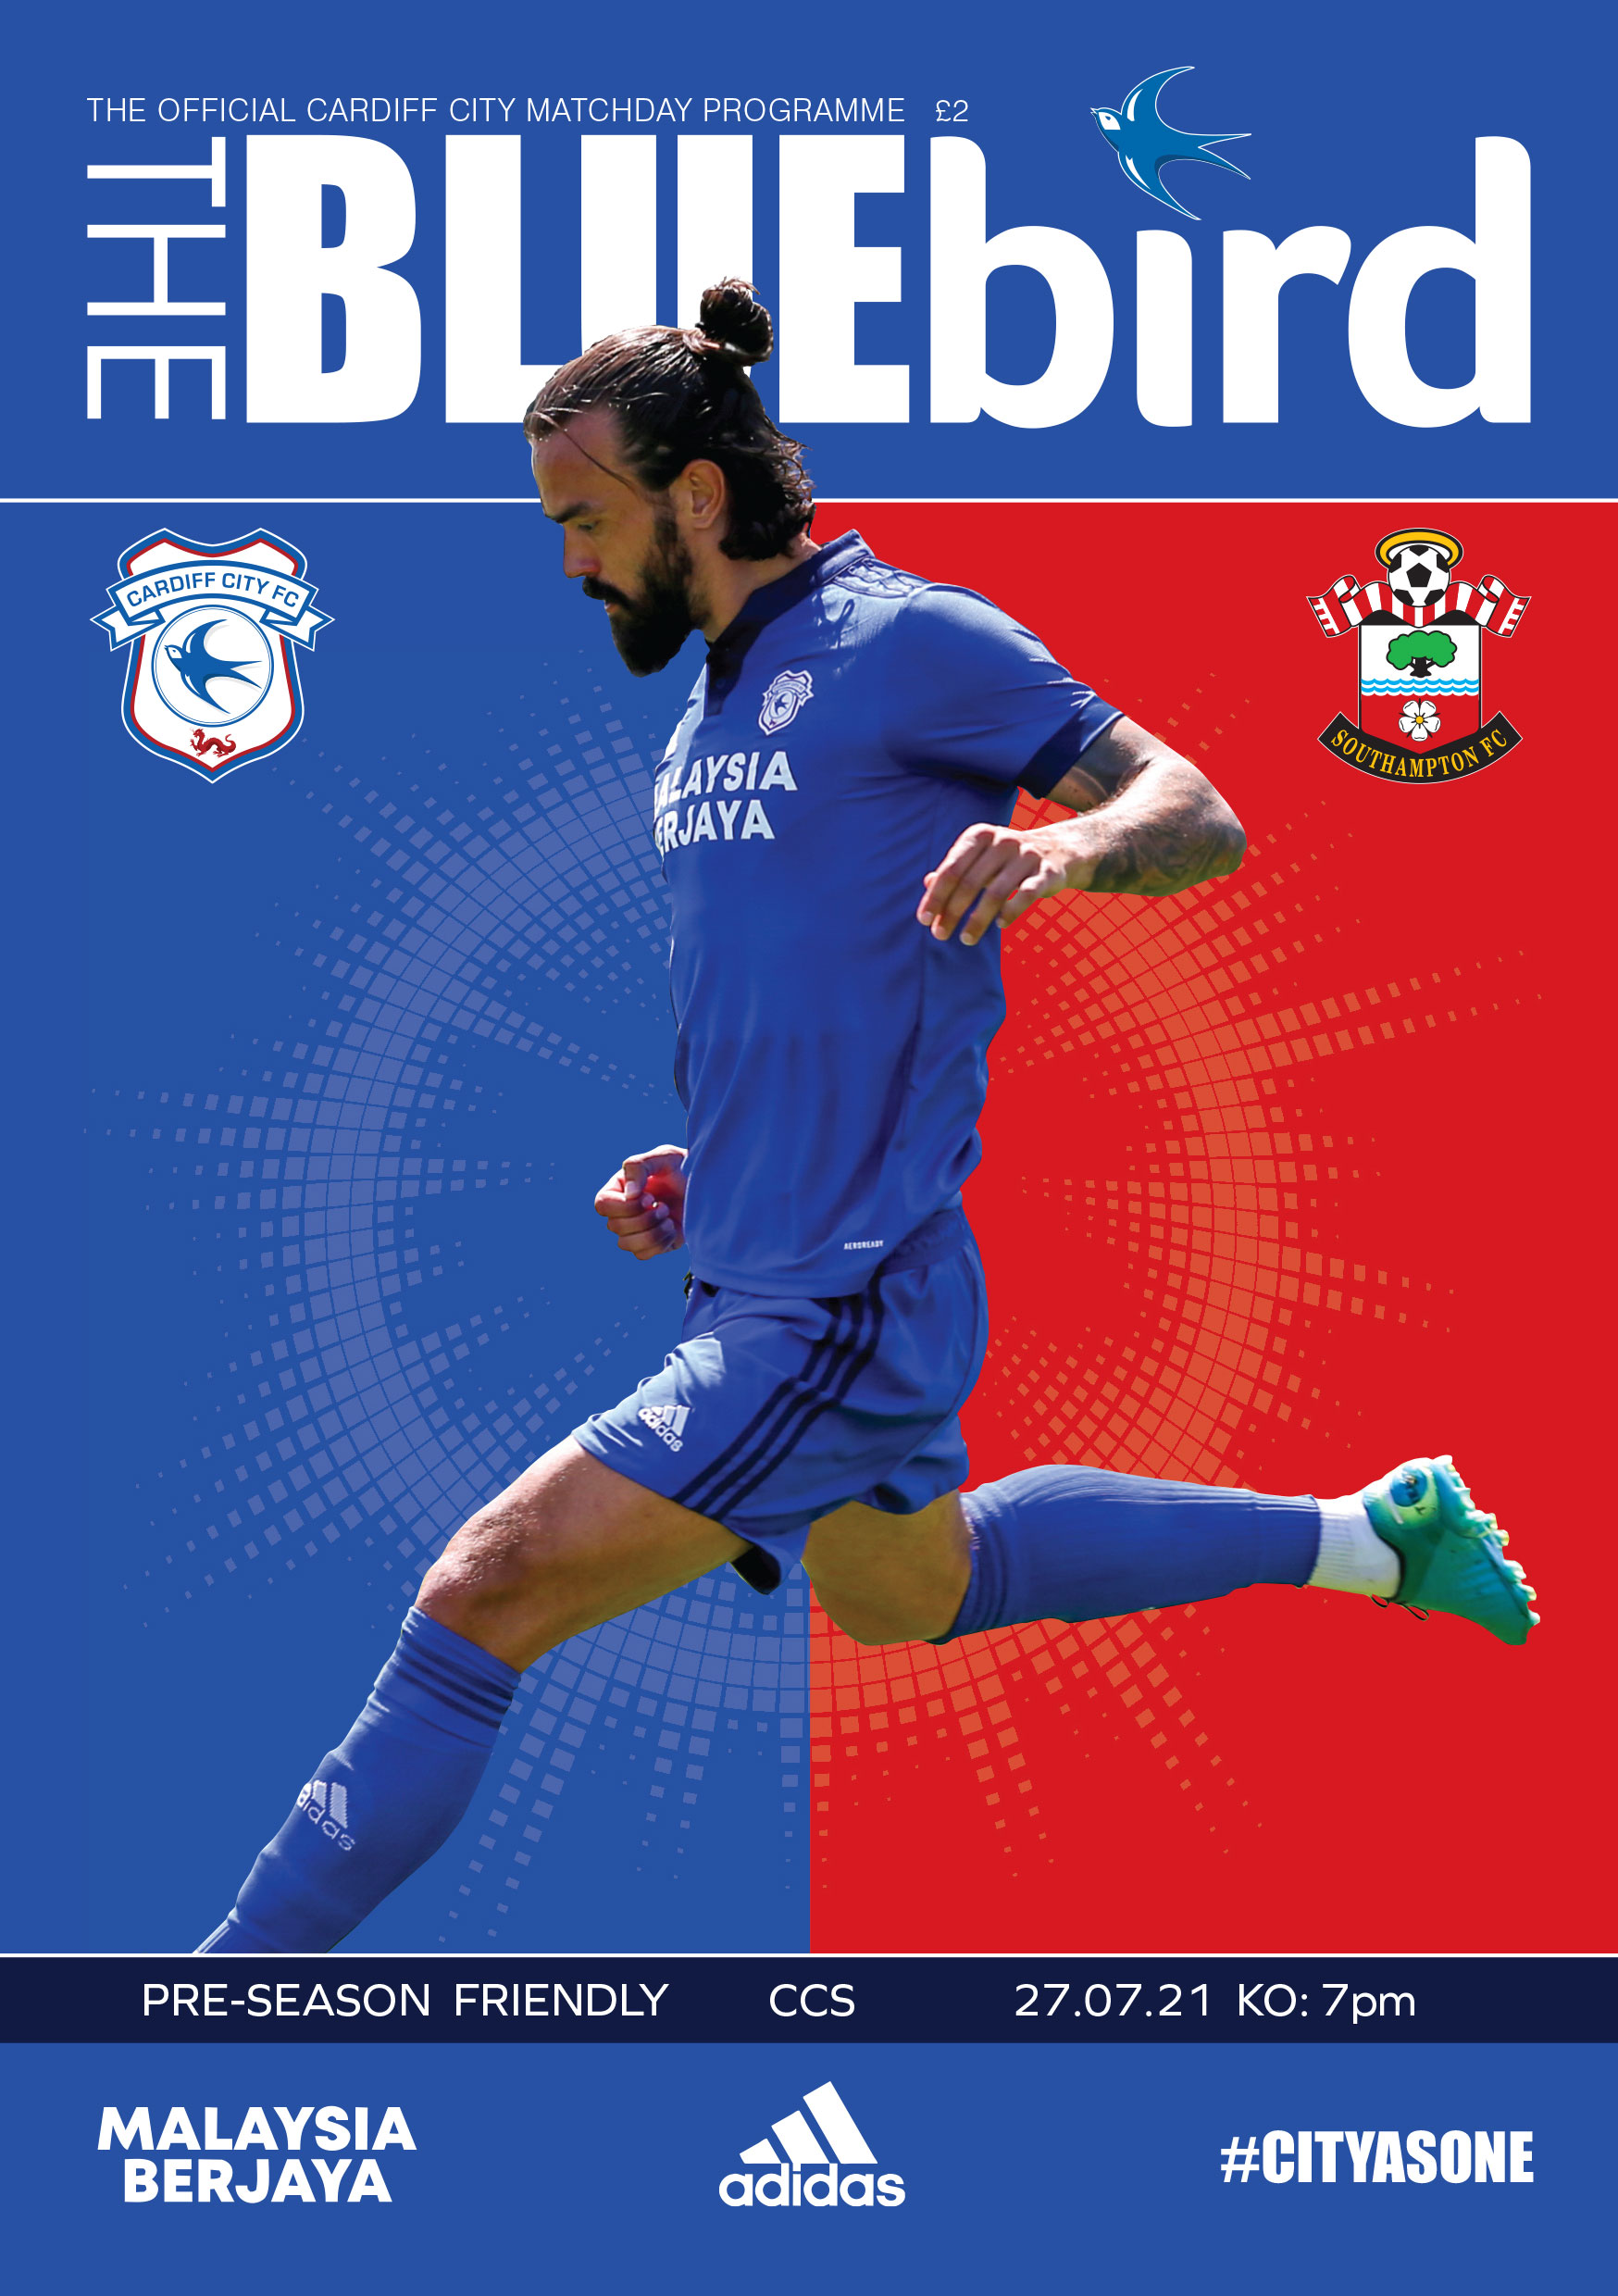 Our Southampton matchday programme cover...